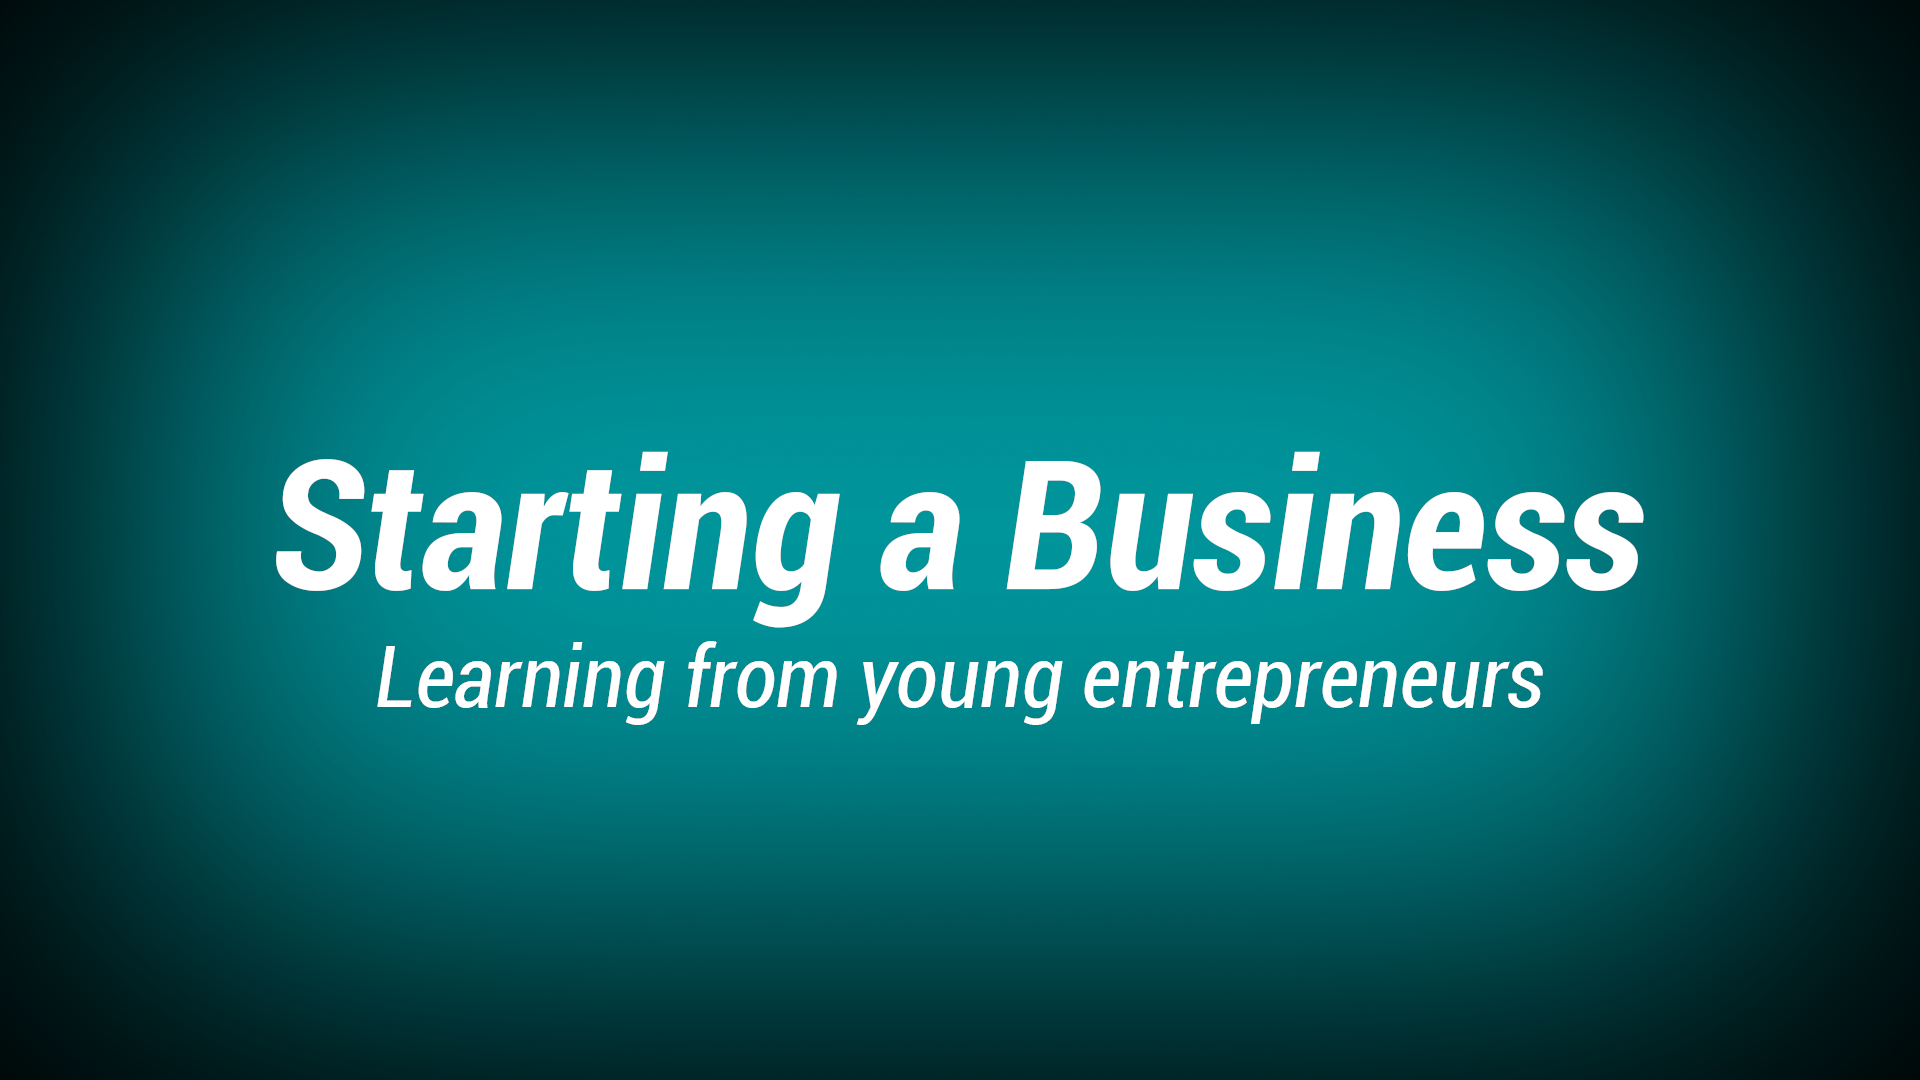 9. Starting a business / Advice for students